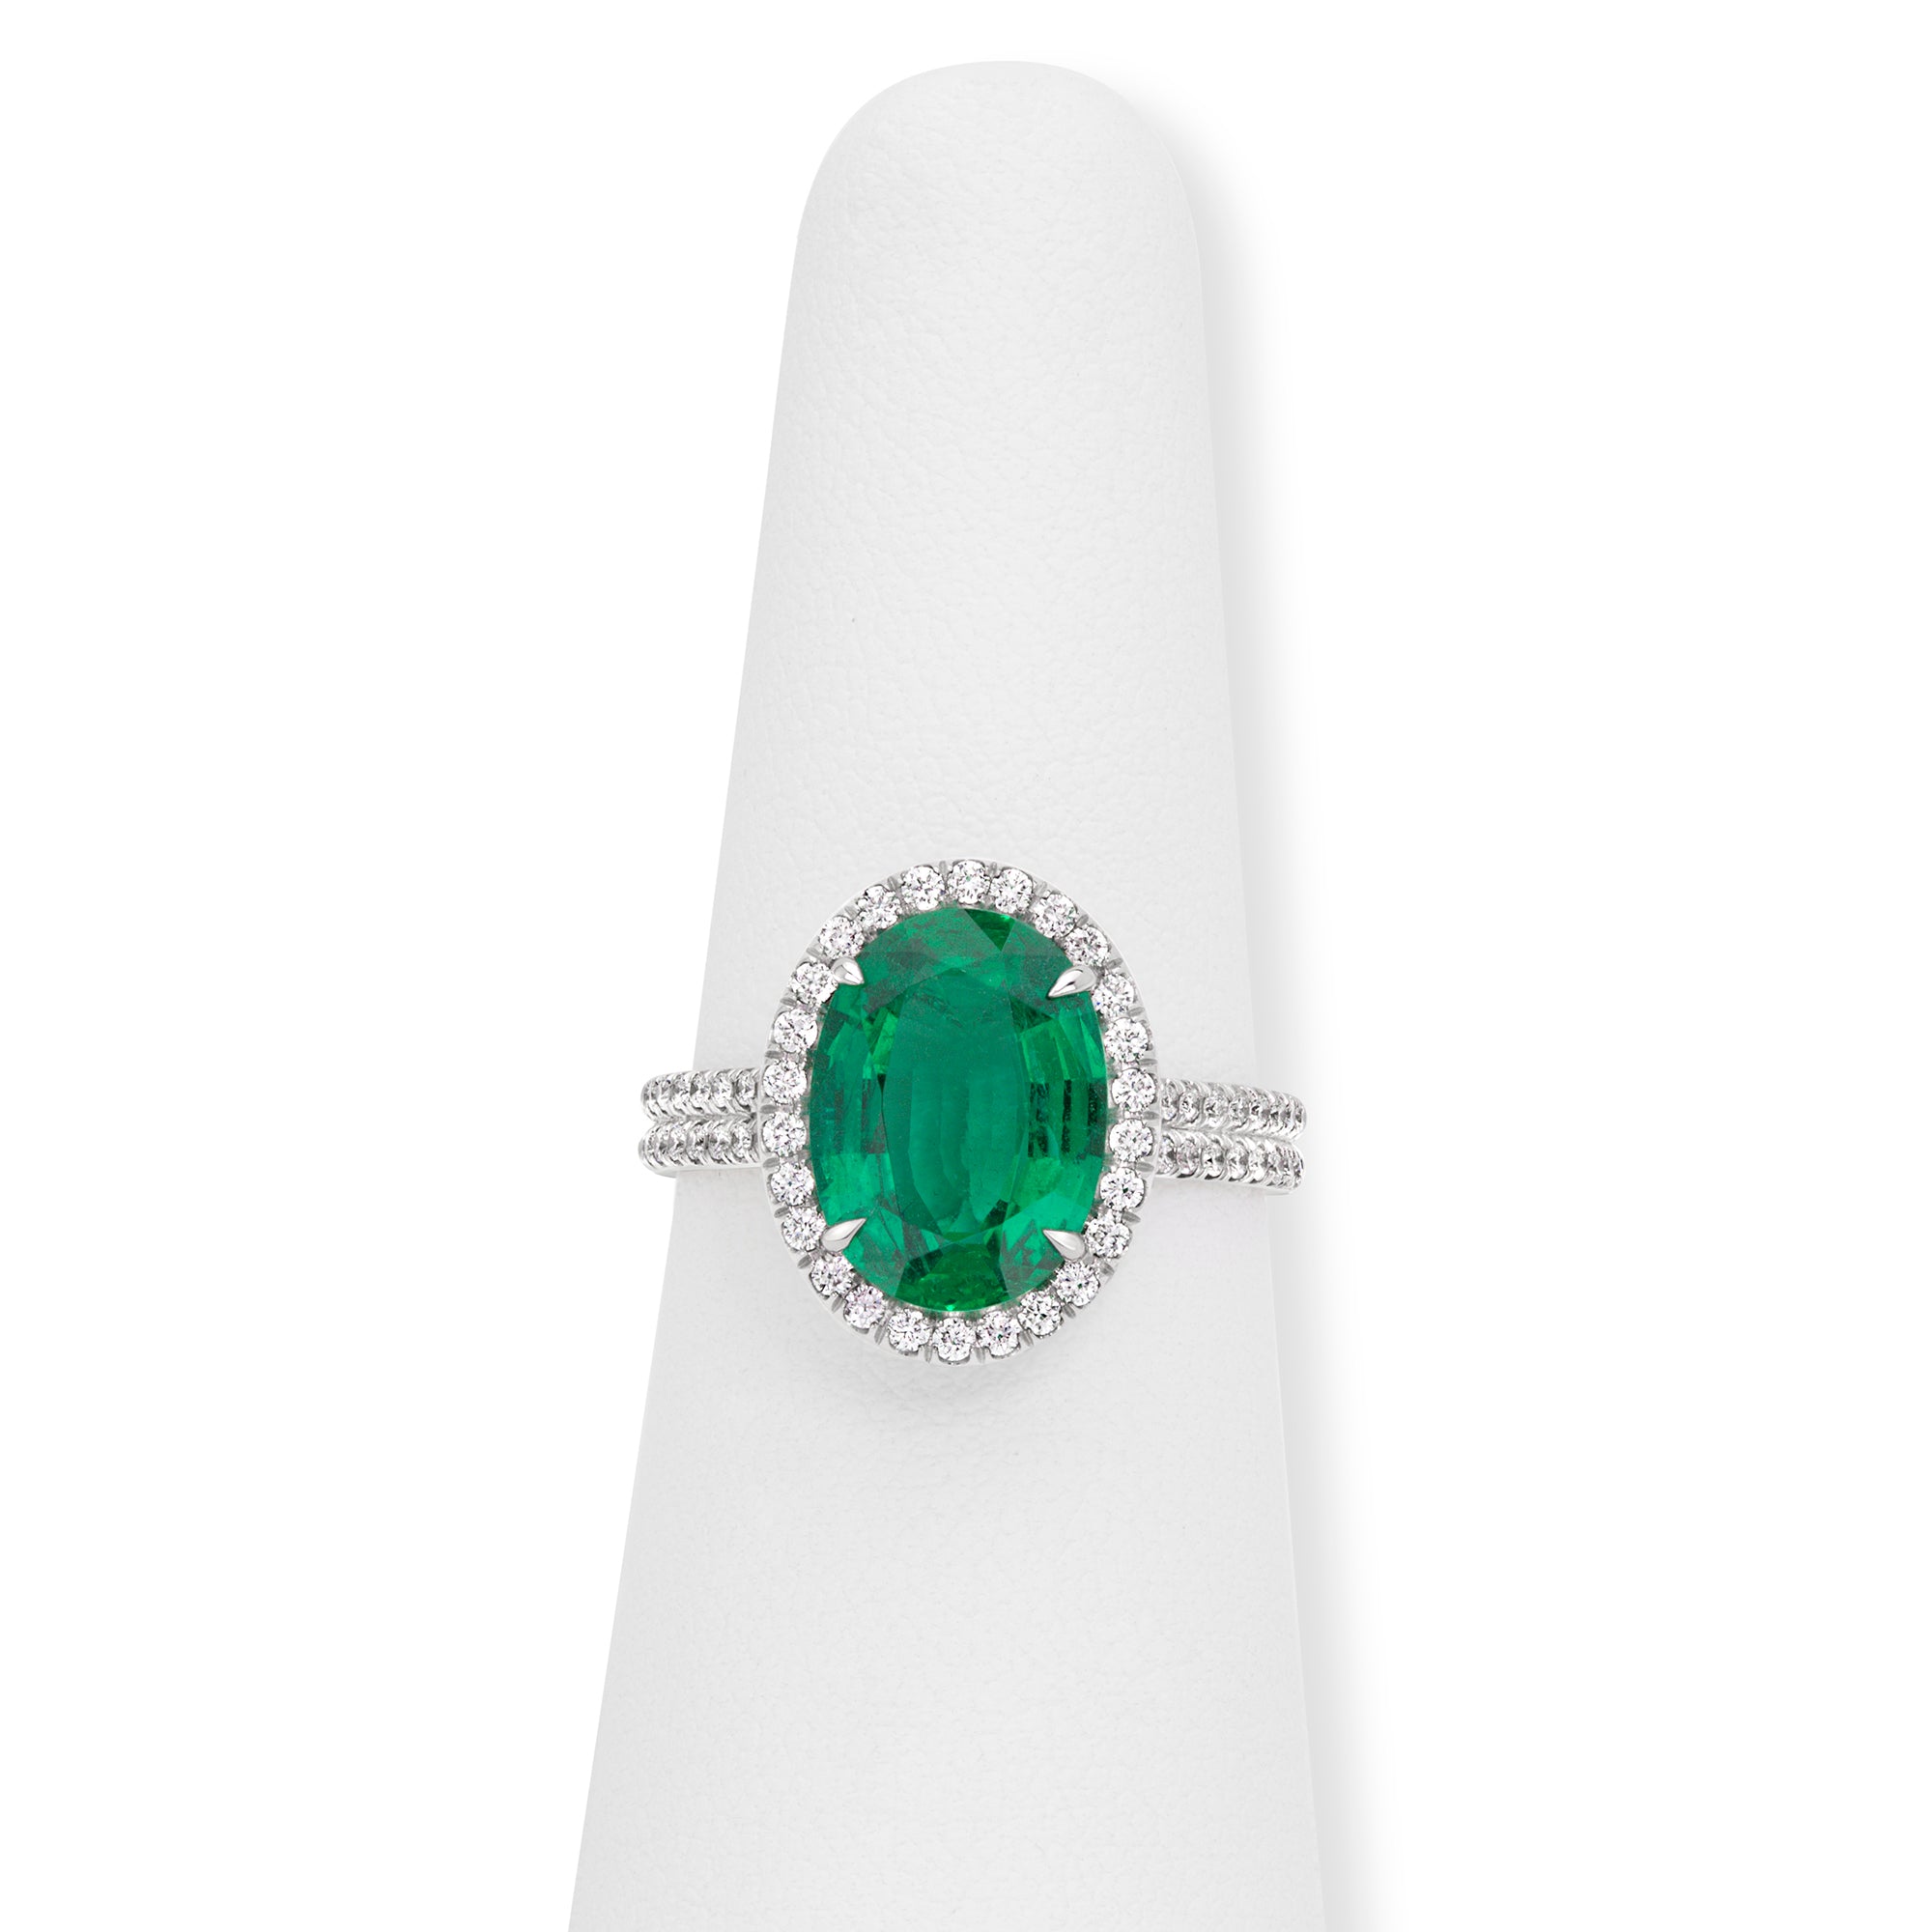 Oval Emerald Halo Ring - 3.72ct TW